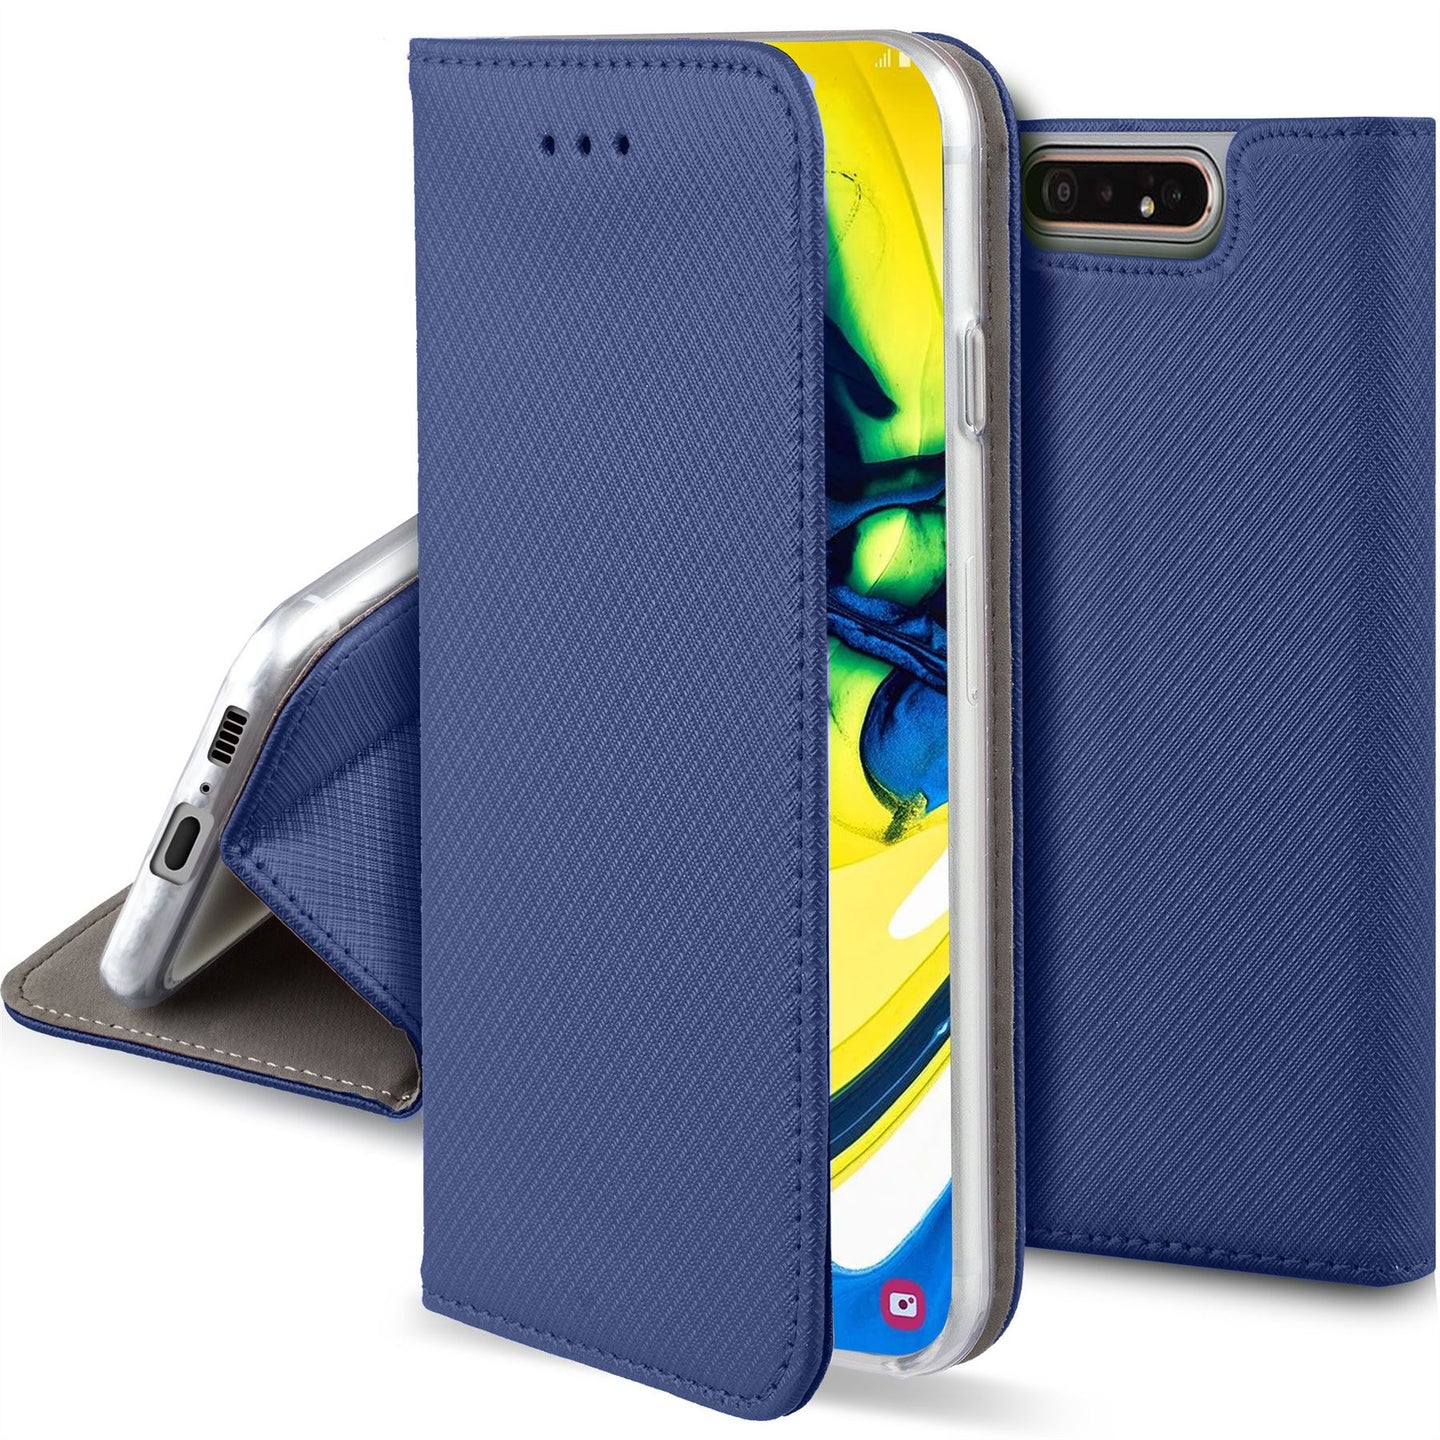 Moozy Case Flip Cover for Samsung A80, Dark Blue - Smart Magnetic Flip Case with Card Holder and Stand